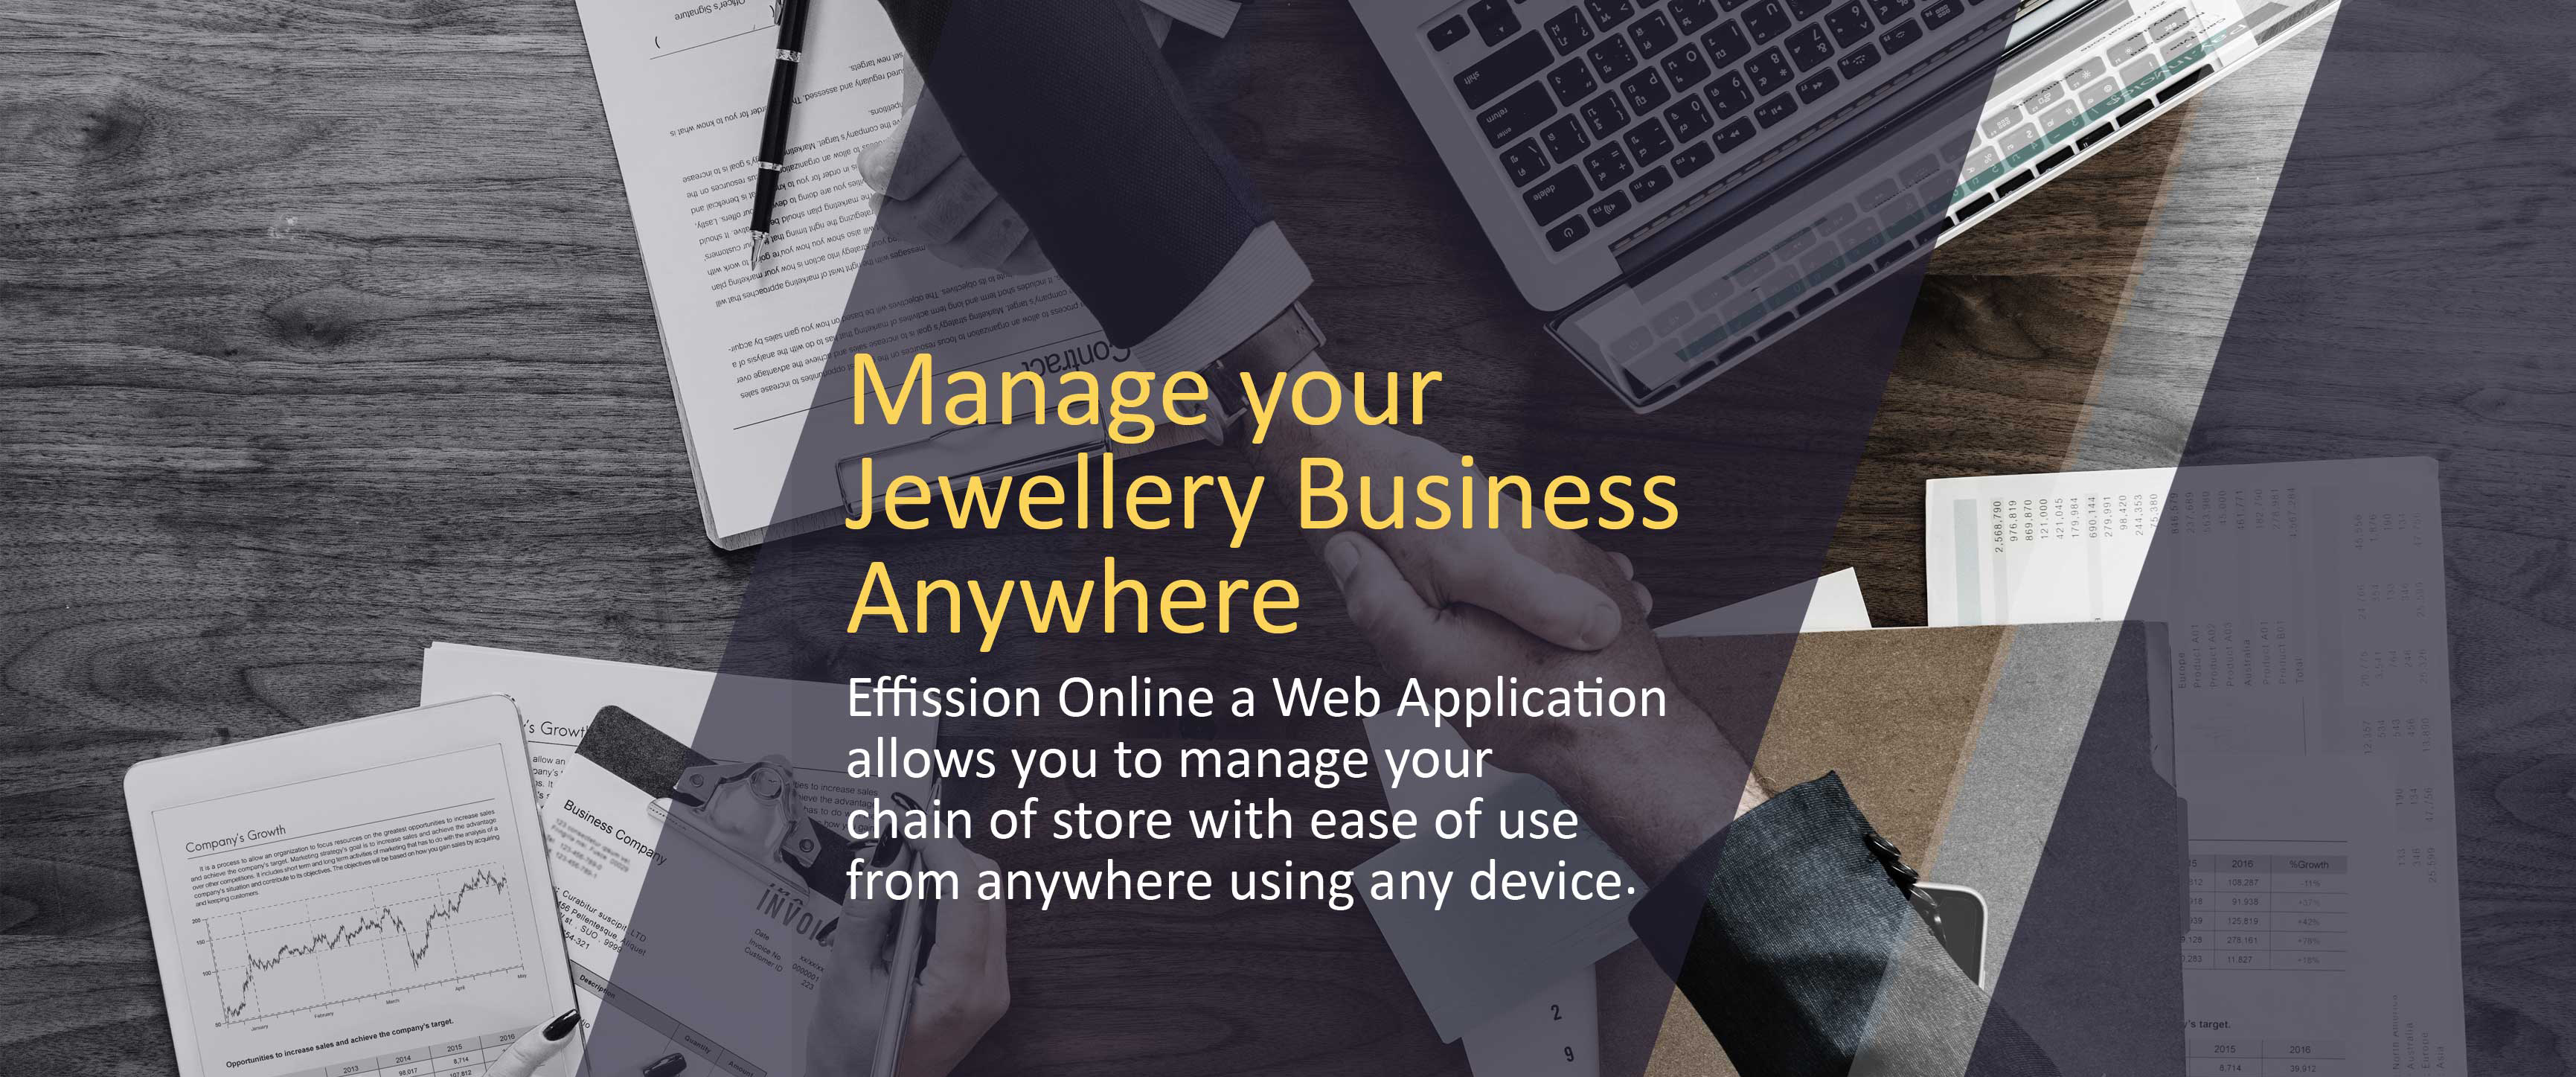 Cloud based jewellery erp software | Effission